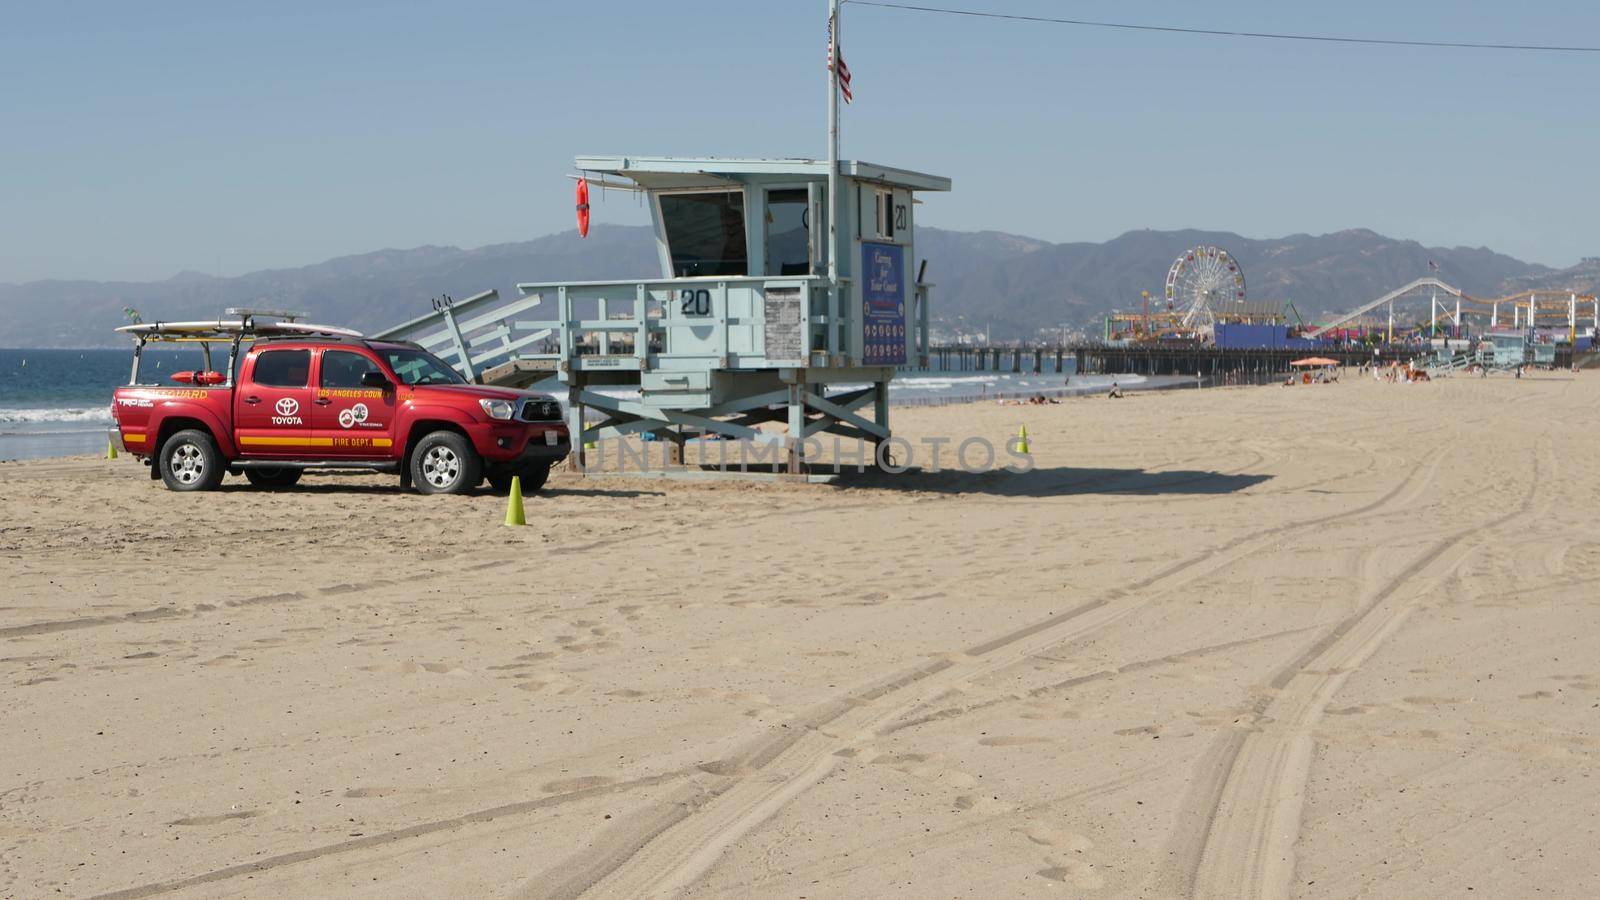 SANTA MONICA, LOS ANGELES CA USA - 28 OCT 2019: California summertime beach aesthetic. Iconic blue wooden watchtower, red lifeguard car on sandy sunny coast. Amusement park and attractions on pier. by DogoraSun